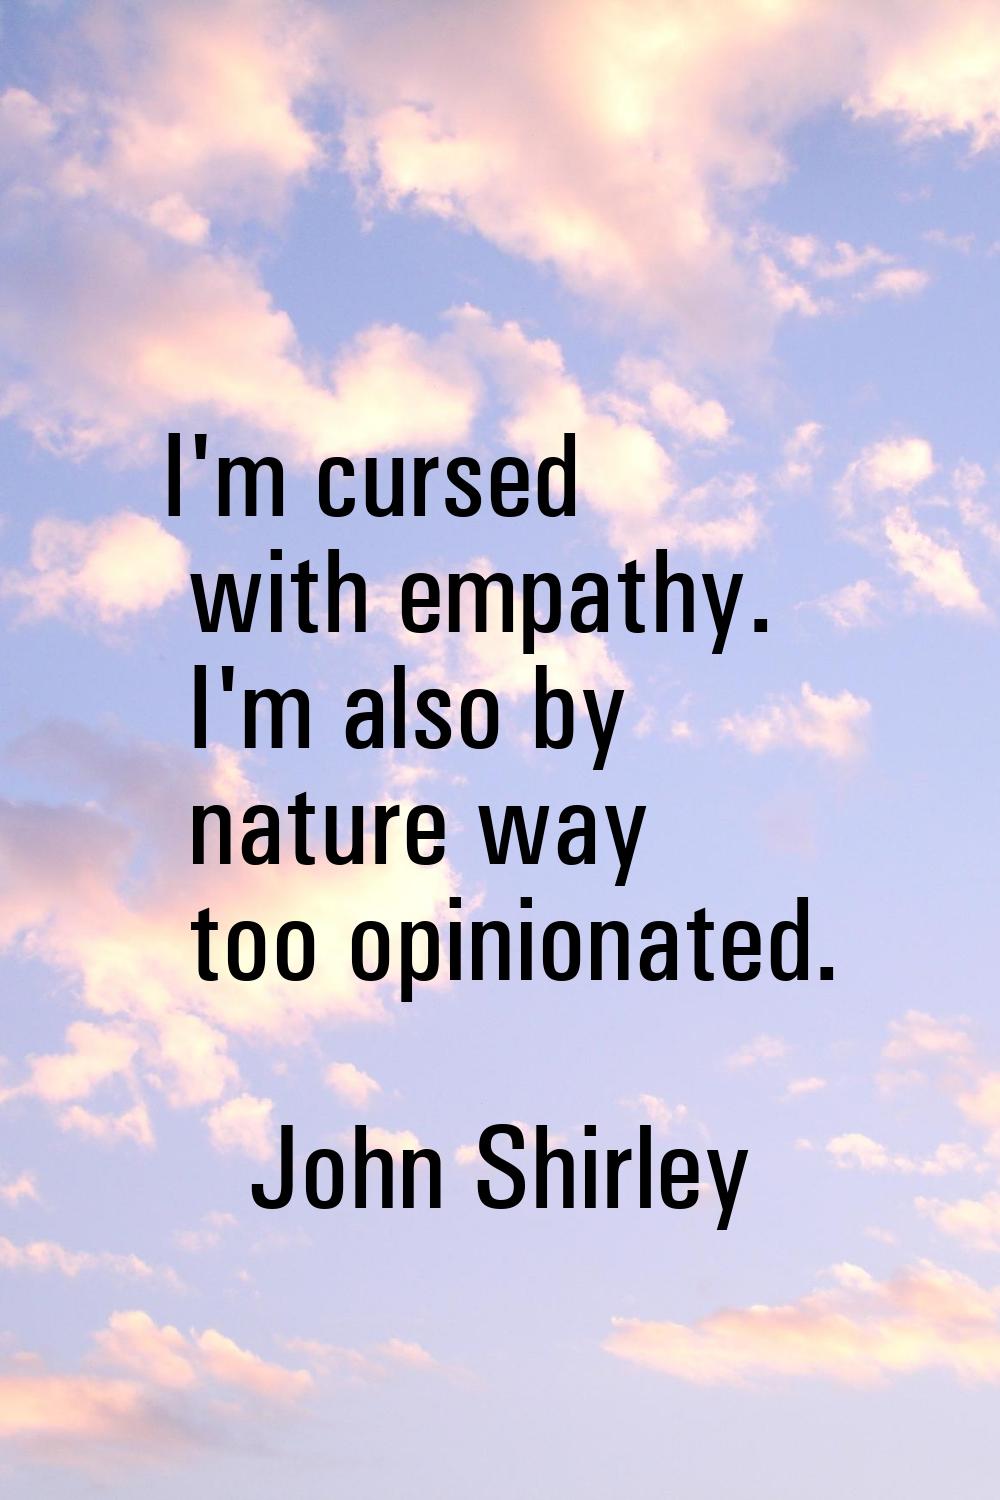 I'm cursed with empathy. I'm also by nature way too opinionated.